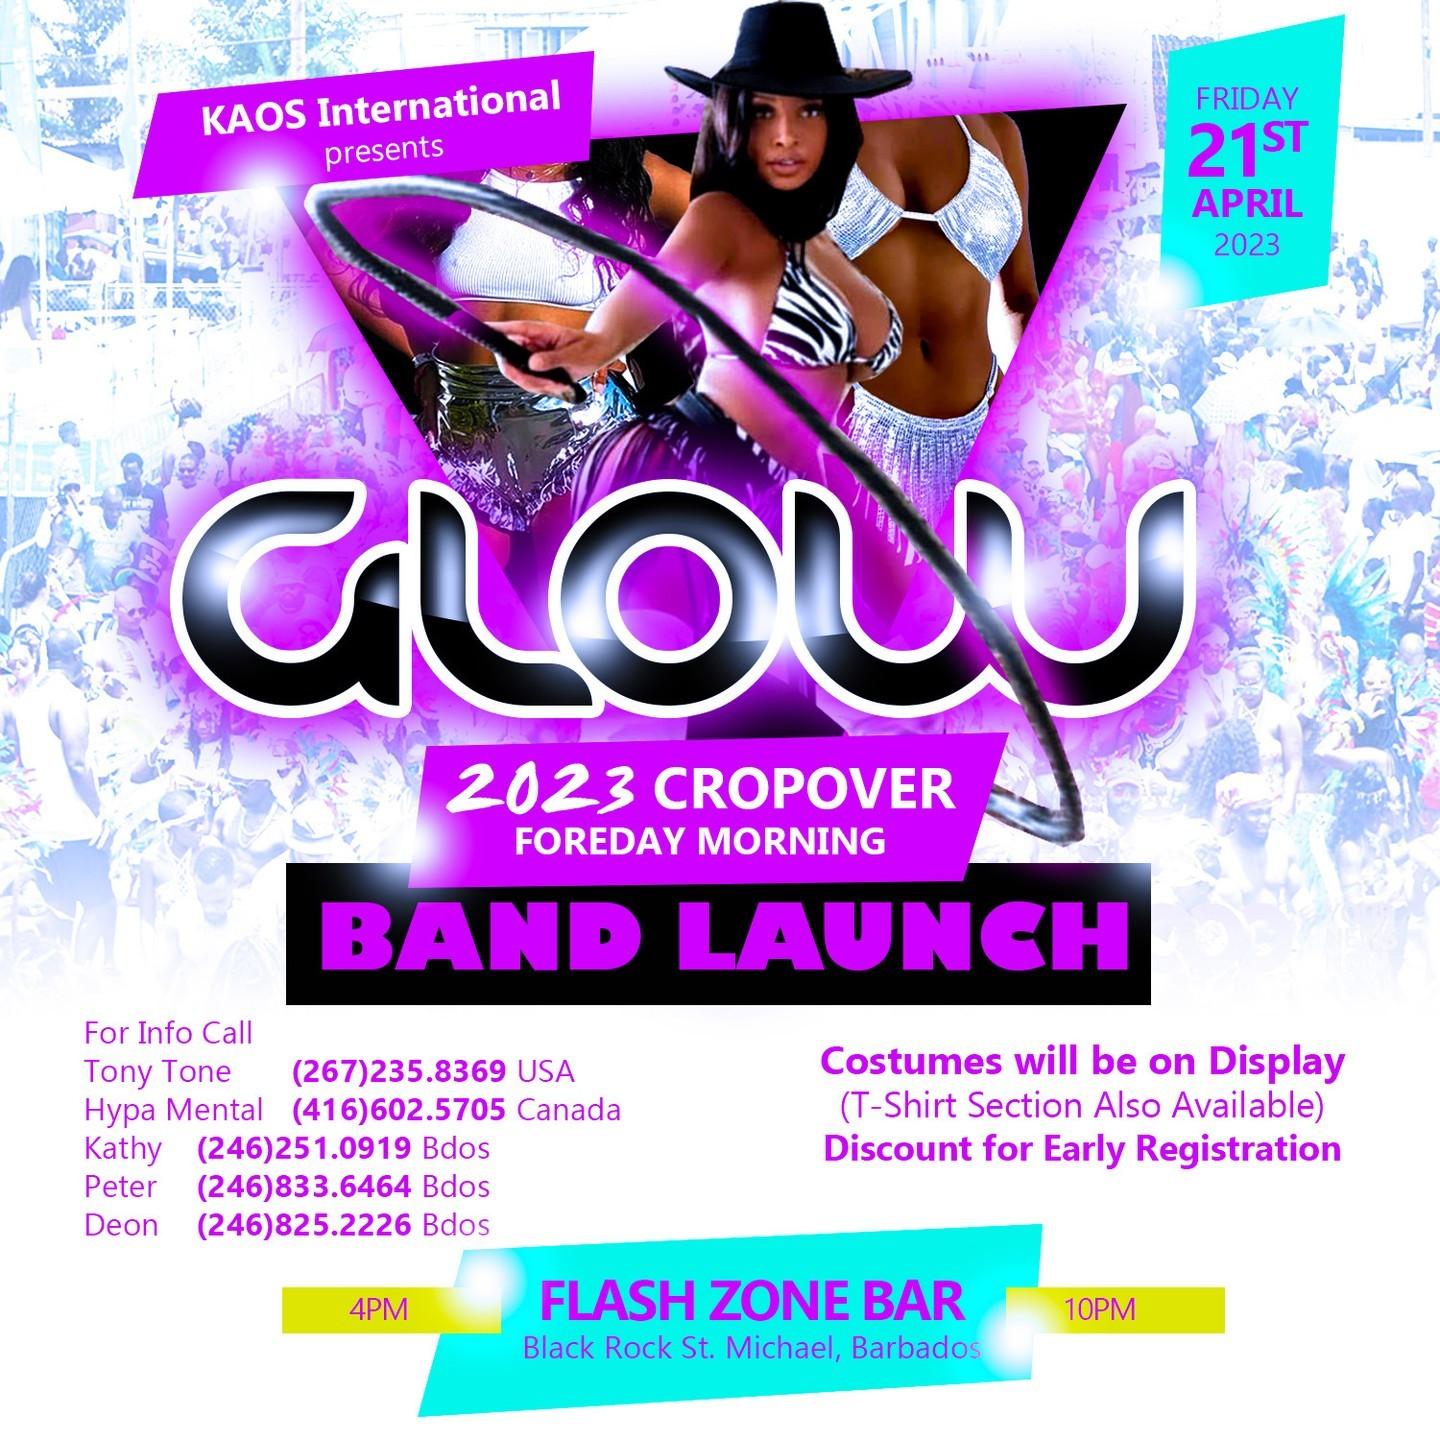 GLOW 2023 Cropover Foreday Morning Band Launch